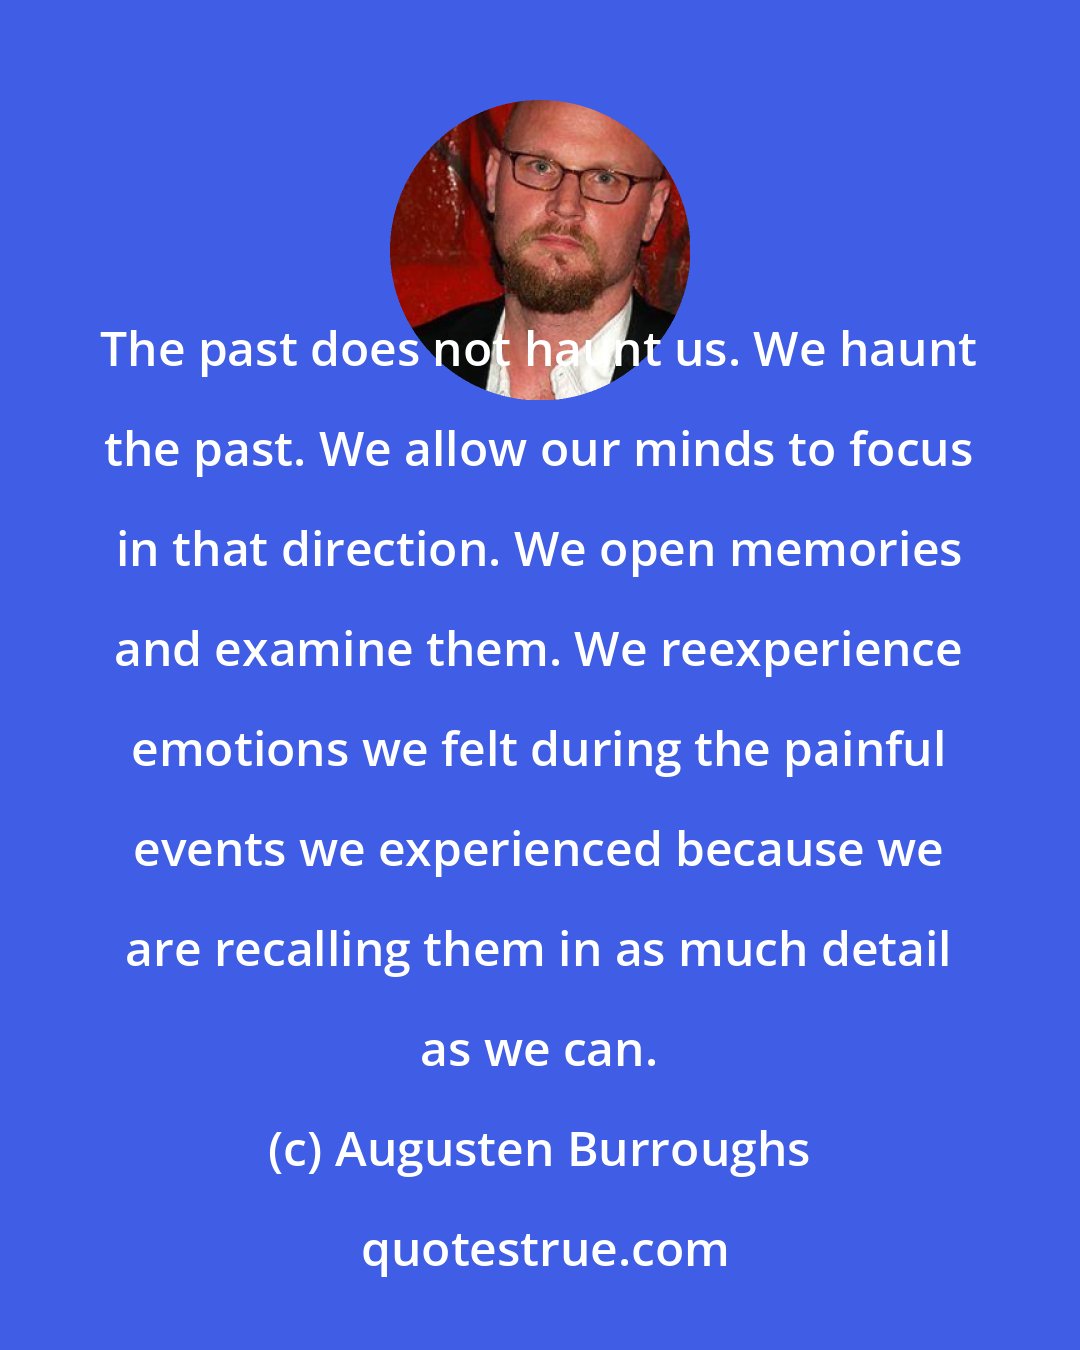 Augusten Burroughs: The past does not haunt us. We haunt the past. We allow our minds to focus in that direction. We open memories and examine them. We reexperience emotions we felt during the painful events we experienced because we are recalling them in as much detail as we can.